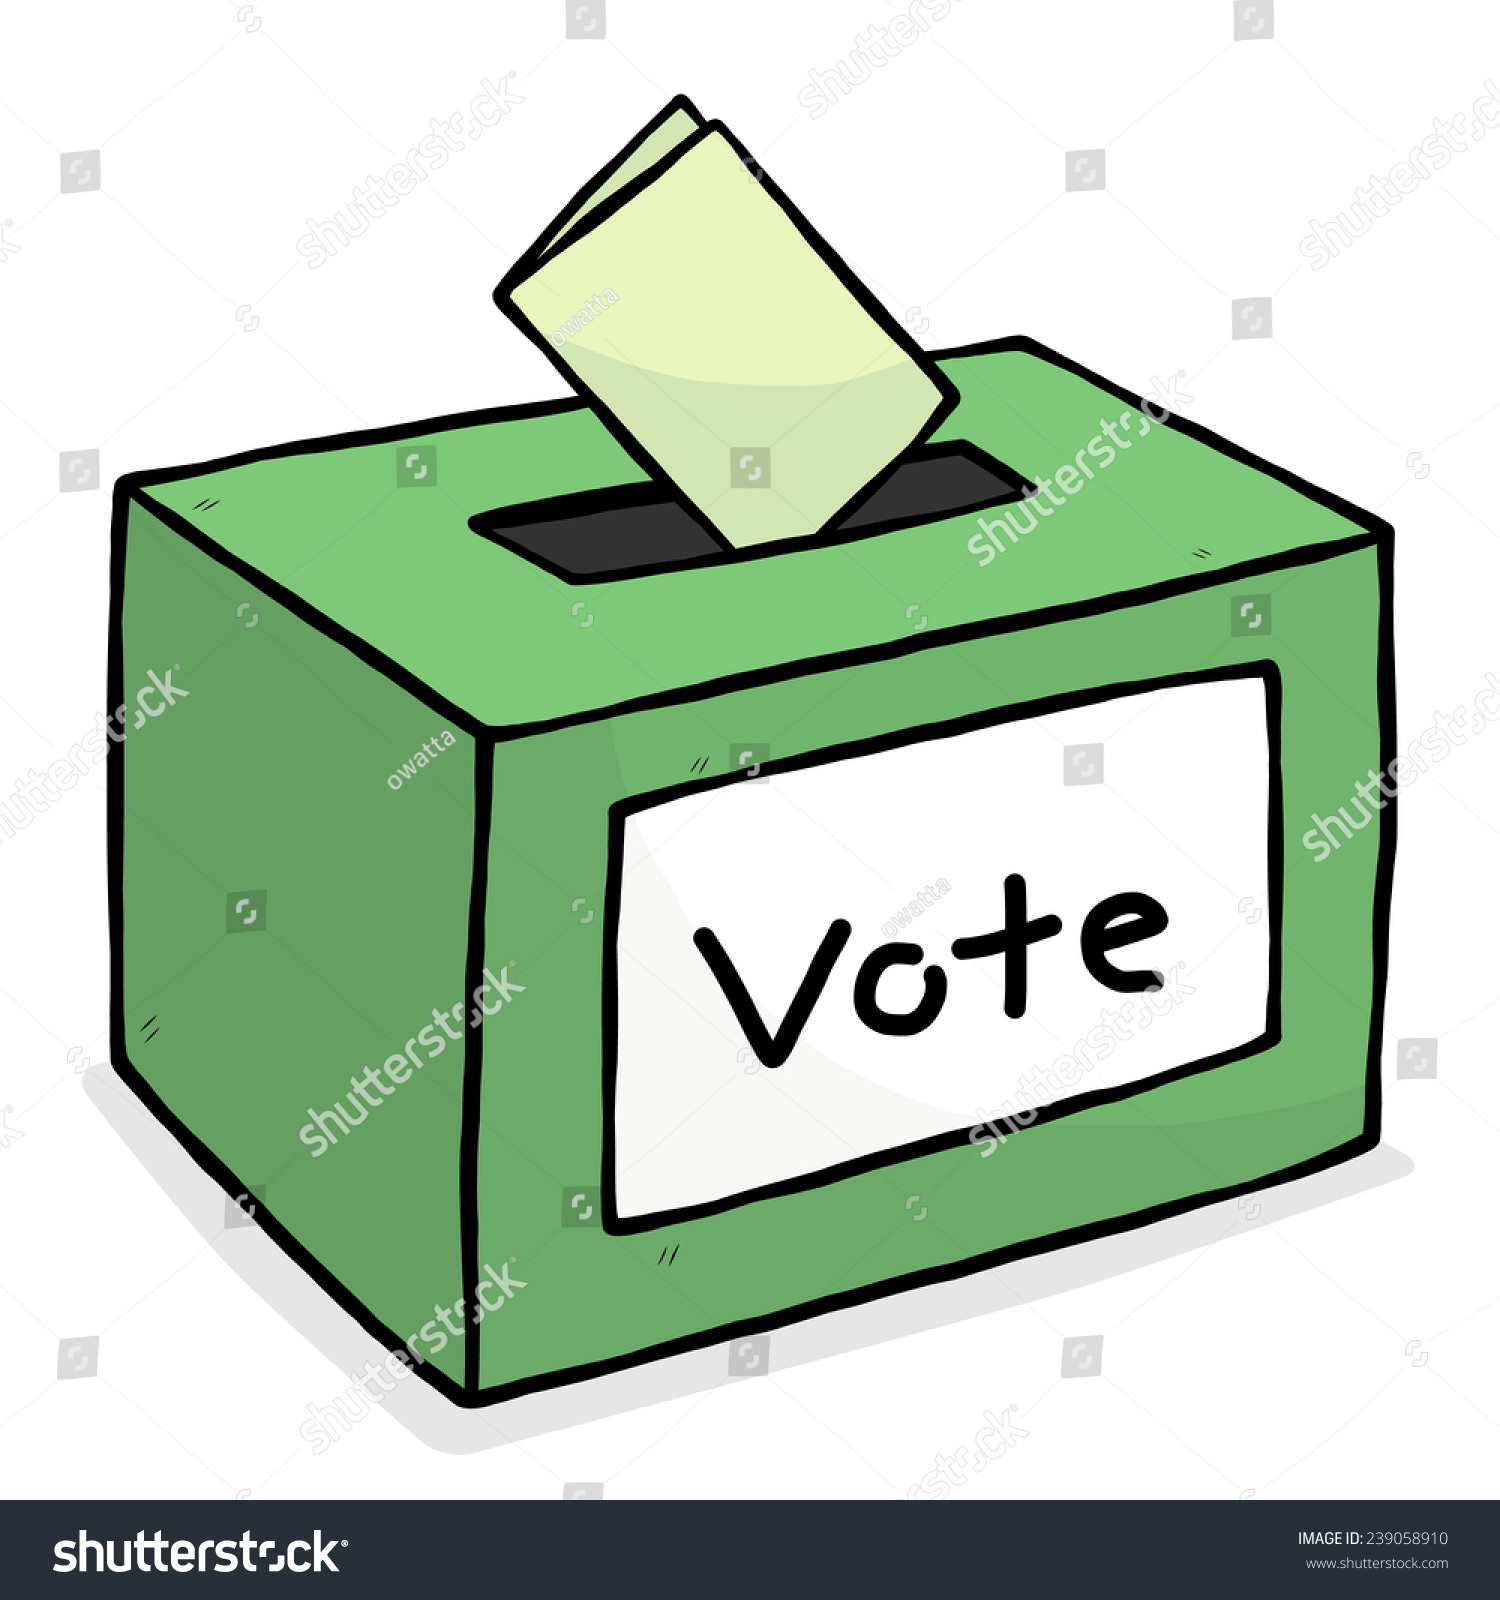 voting clipart pictures - photo #43